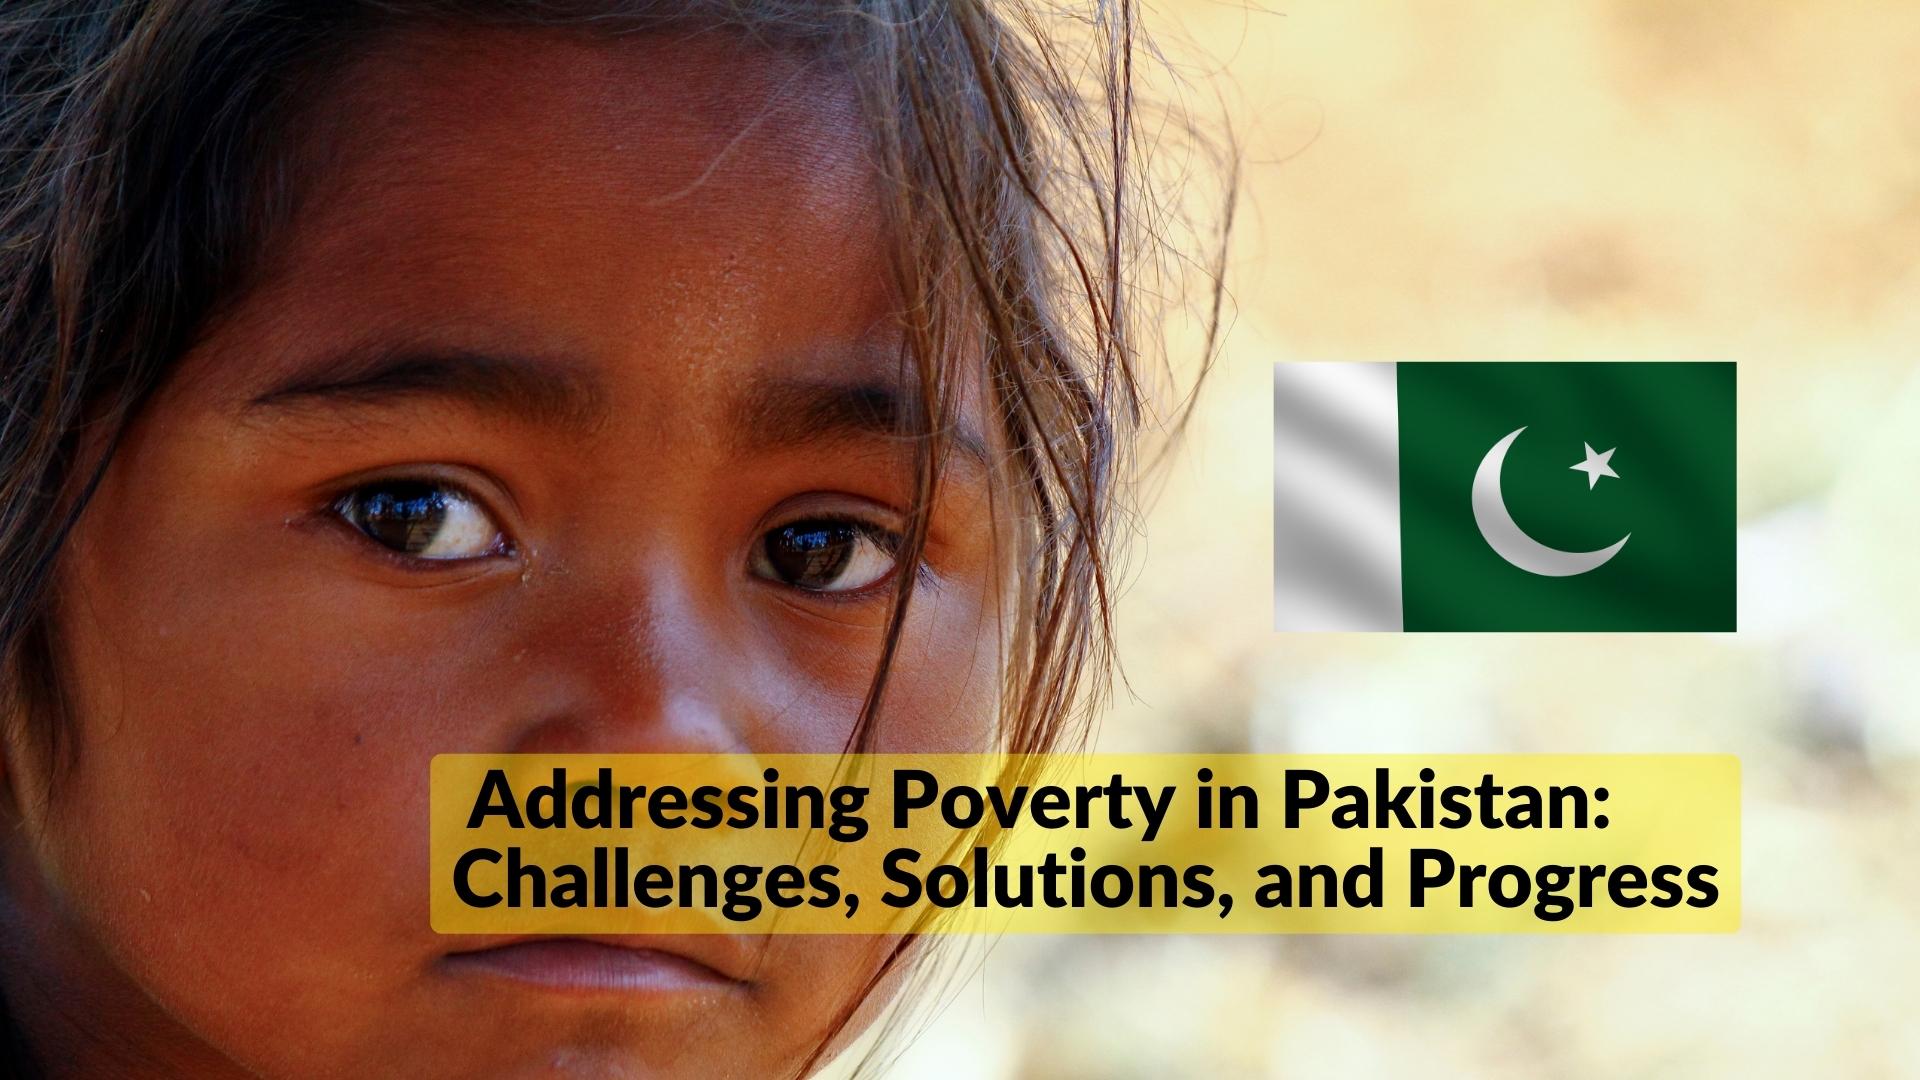 Addressing Poverty in Pakistan: Challenges, Solutions, and Progress